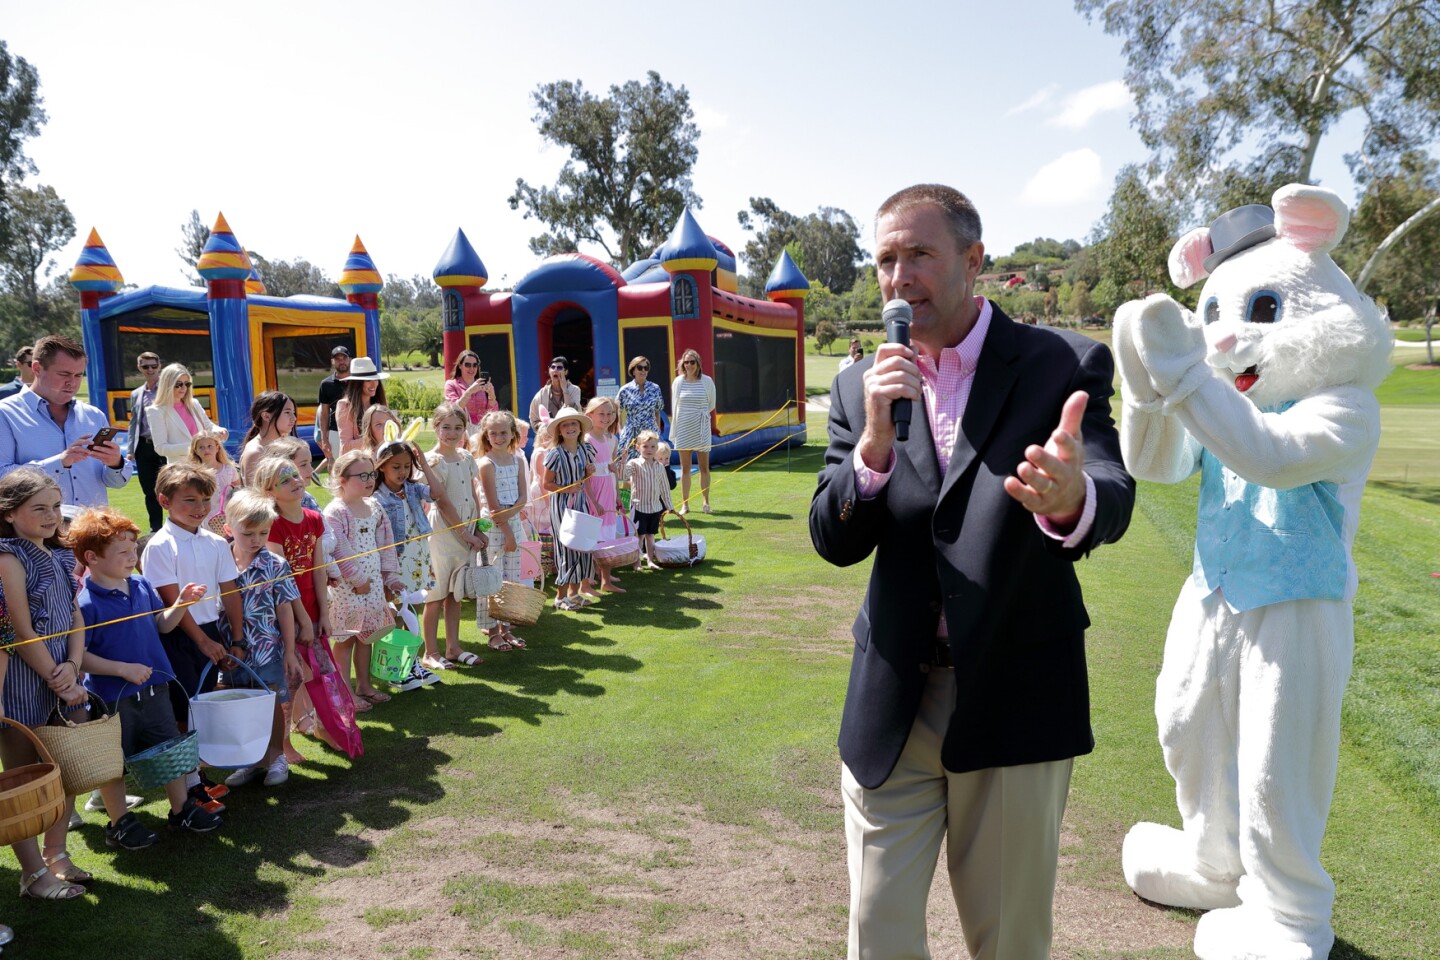 RSF Golf Club general manager Todd Huizinga asks the children to line up for the Easter Egg Hunt